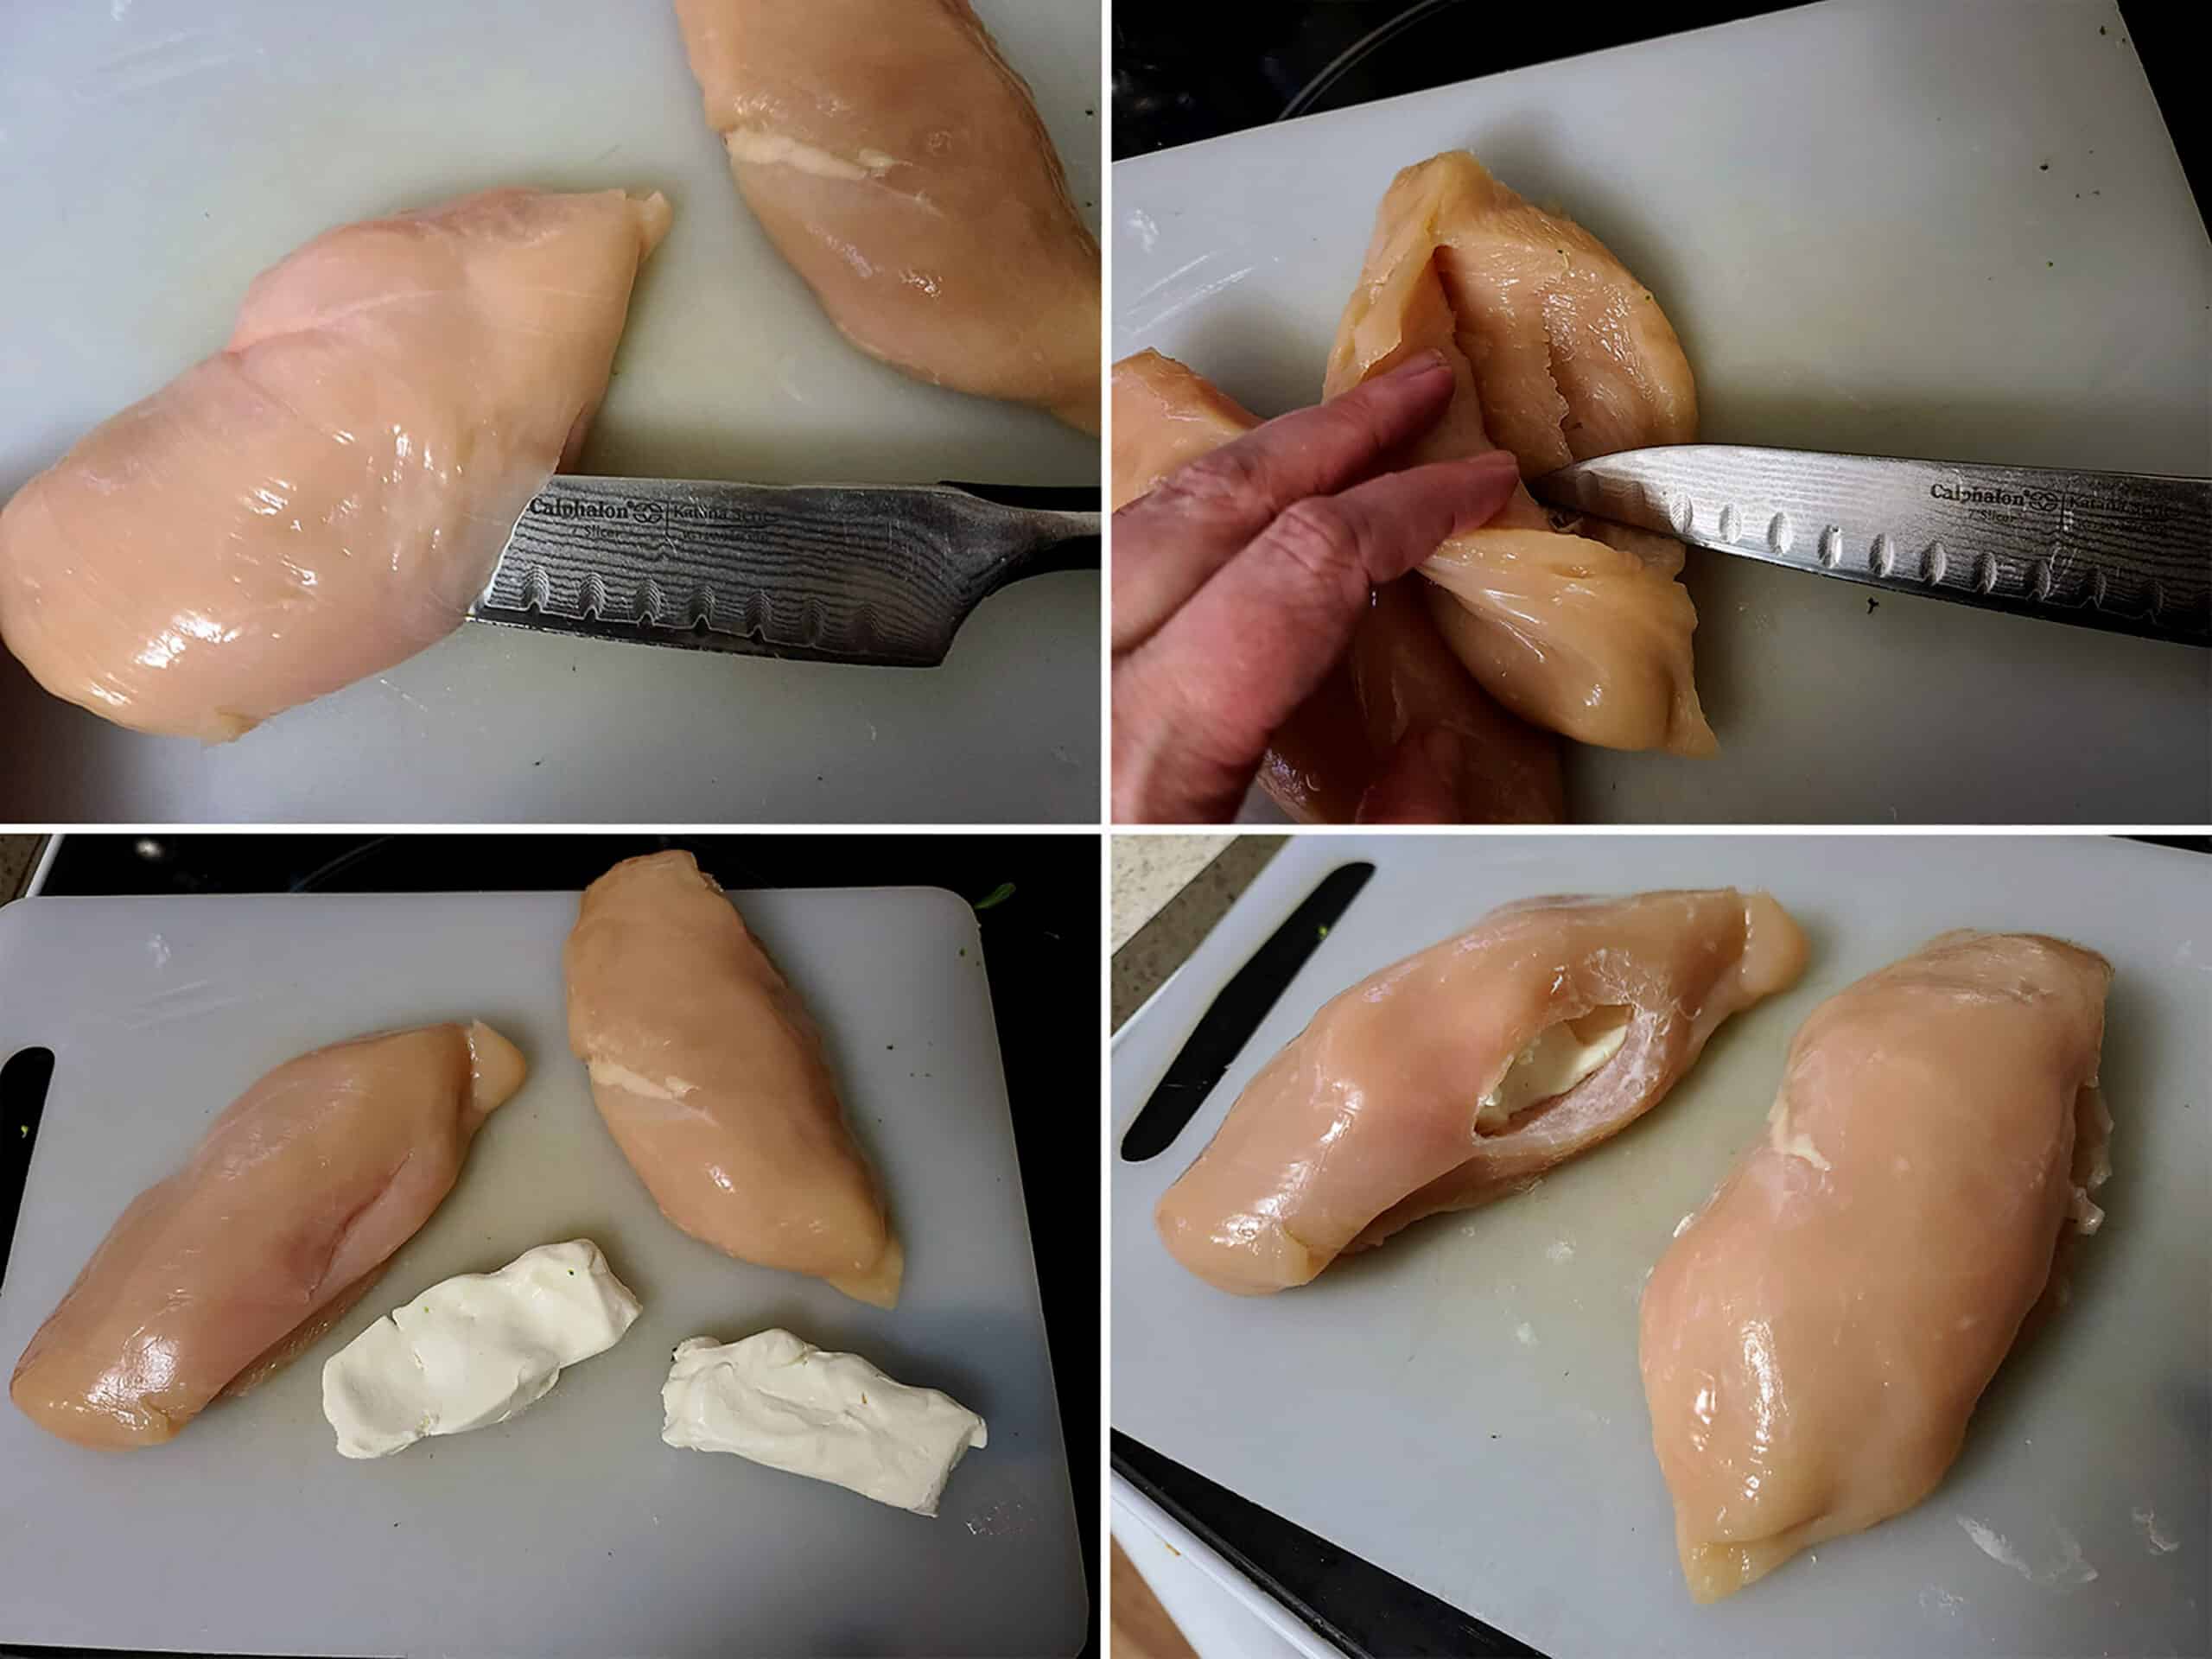 A 4 part image showing chicken breasts being slit open and stuffed with pieces of cream cheese.